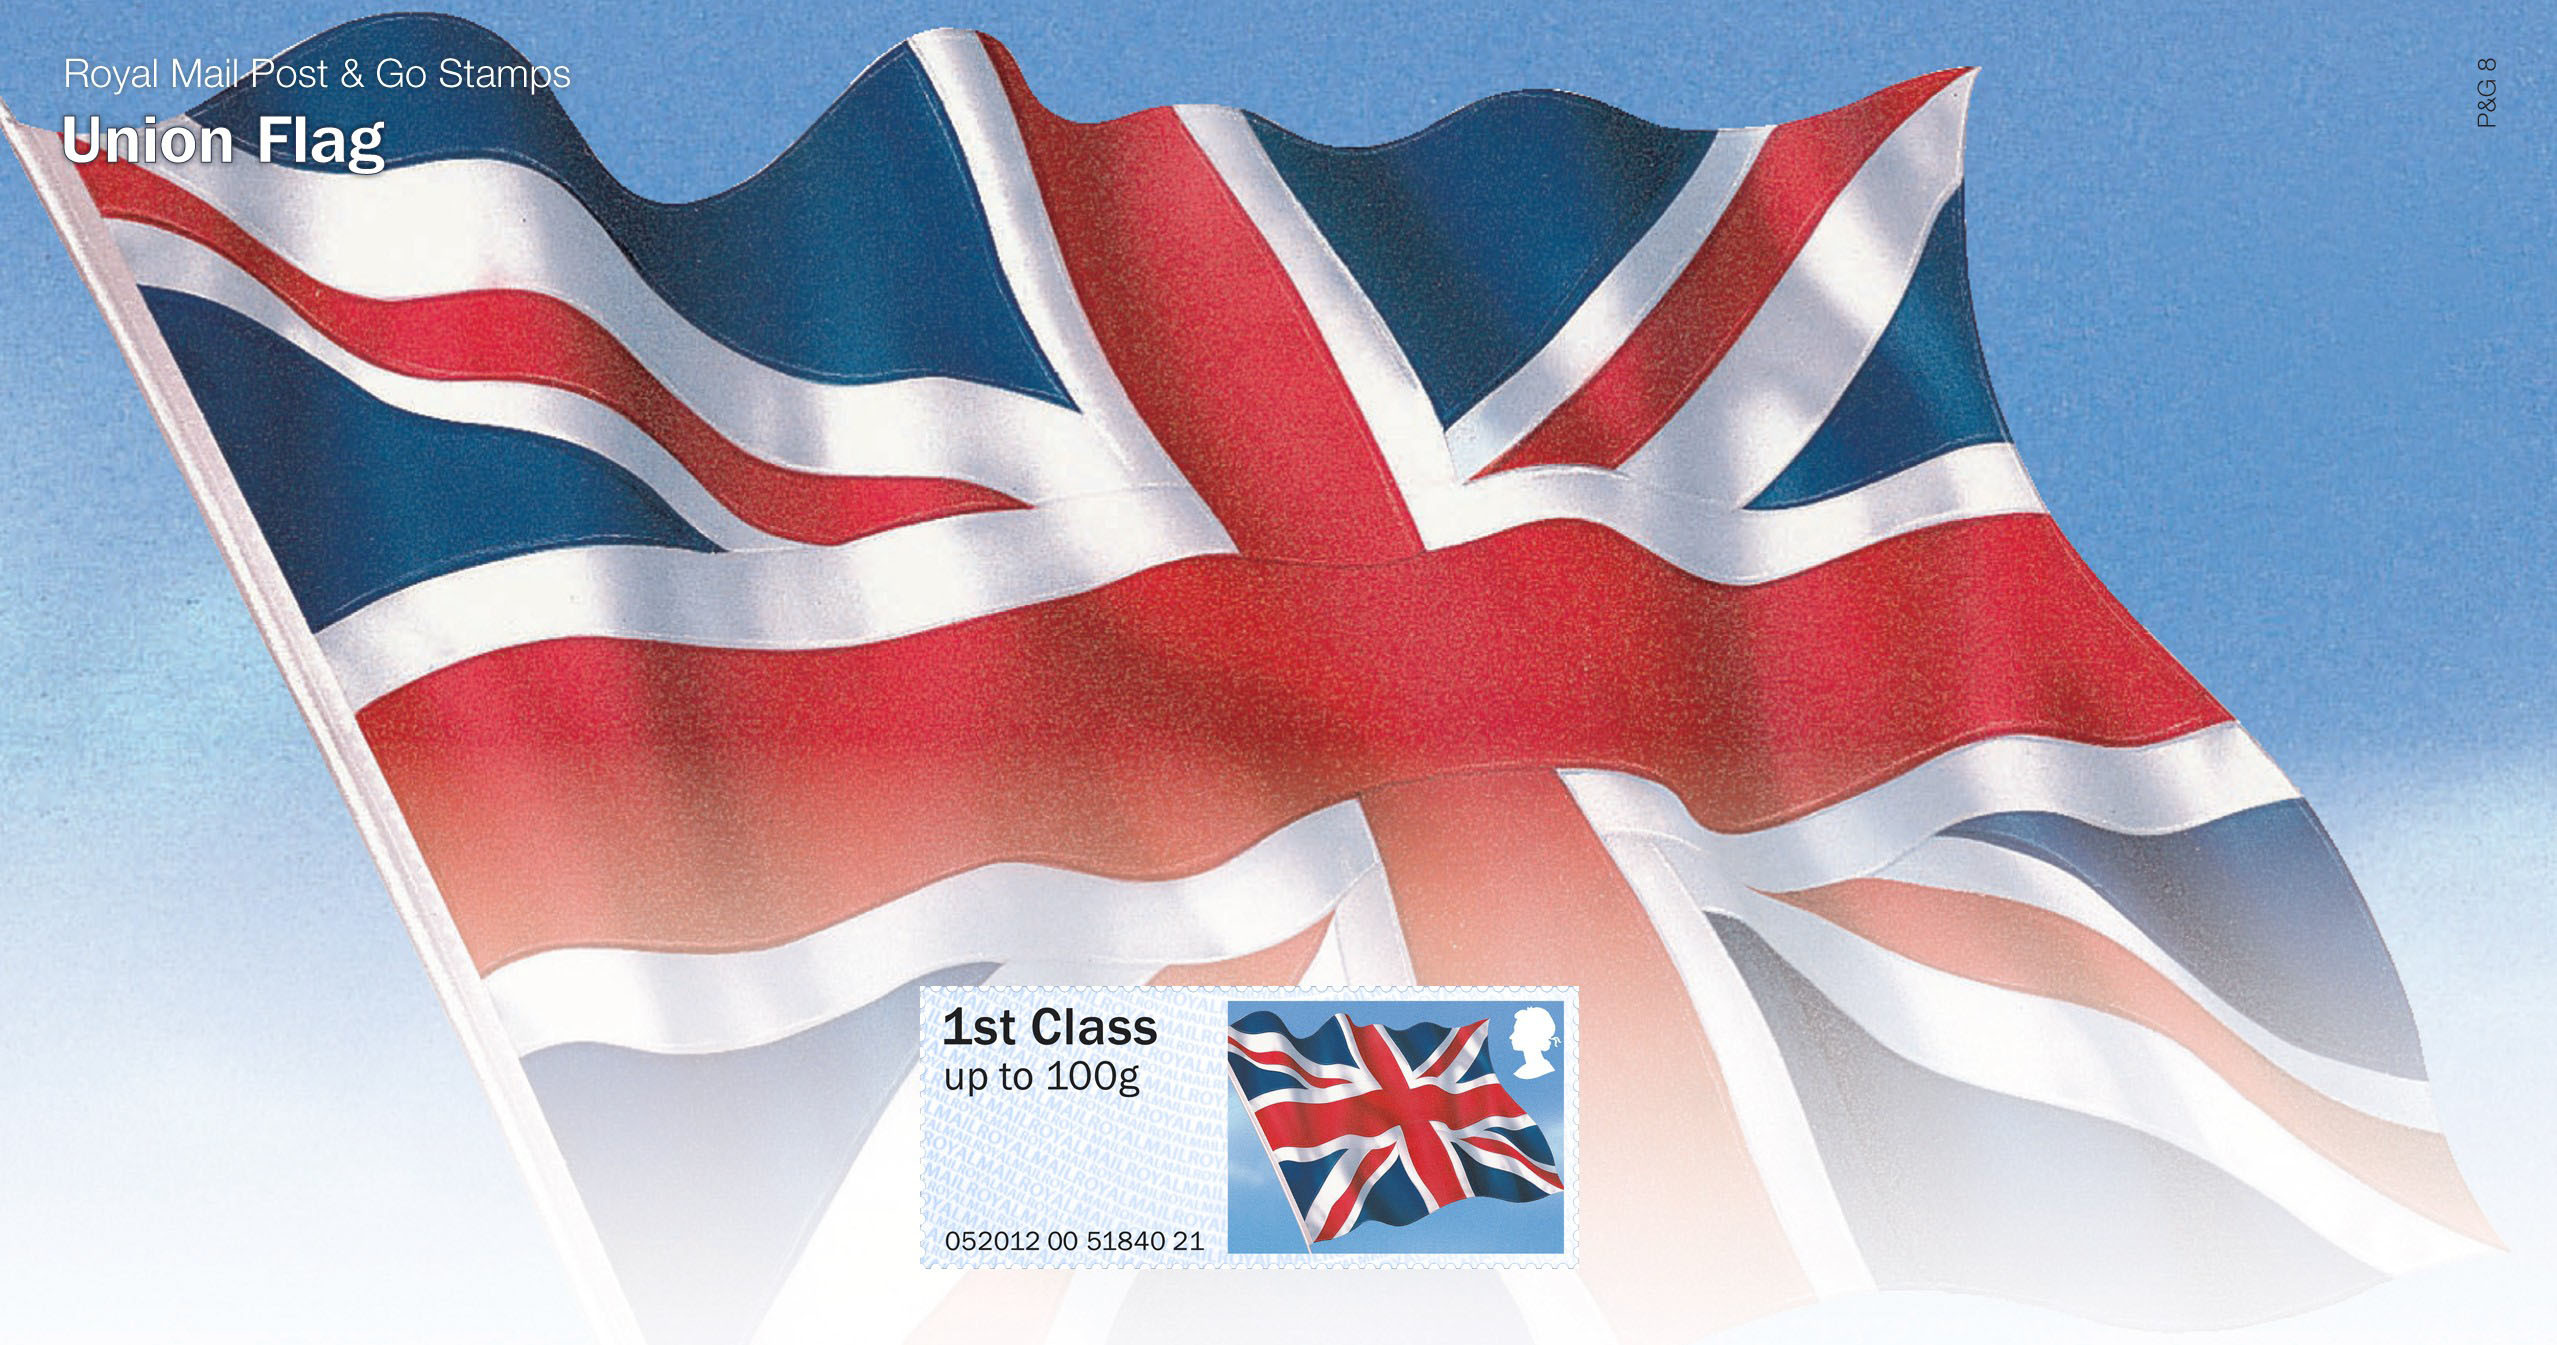 2557x1345 Post & go stamp of the Union Jack on a flag background.